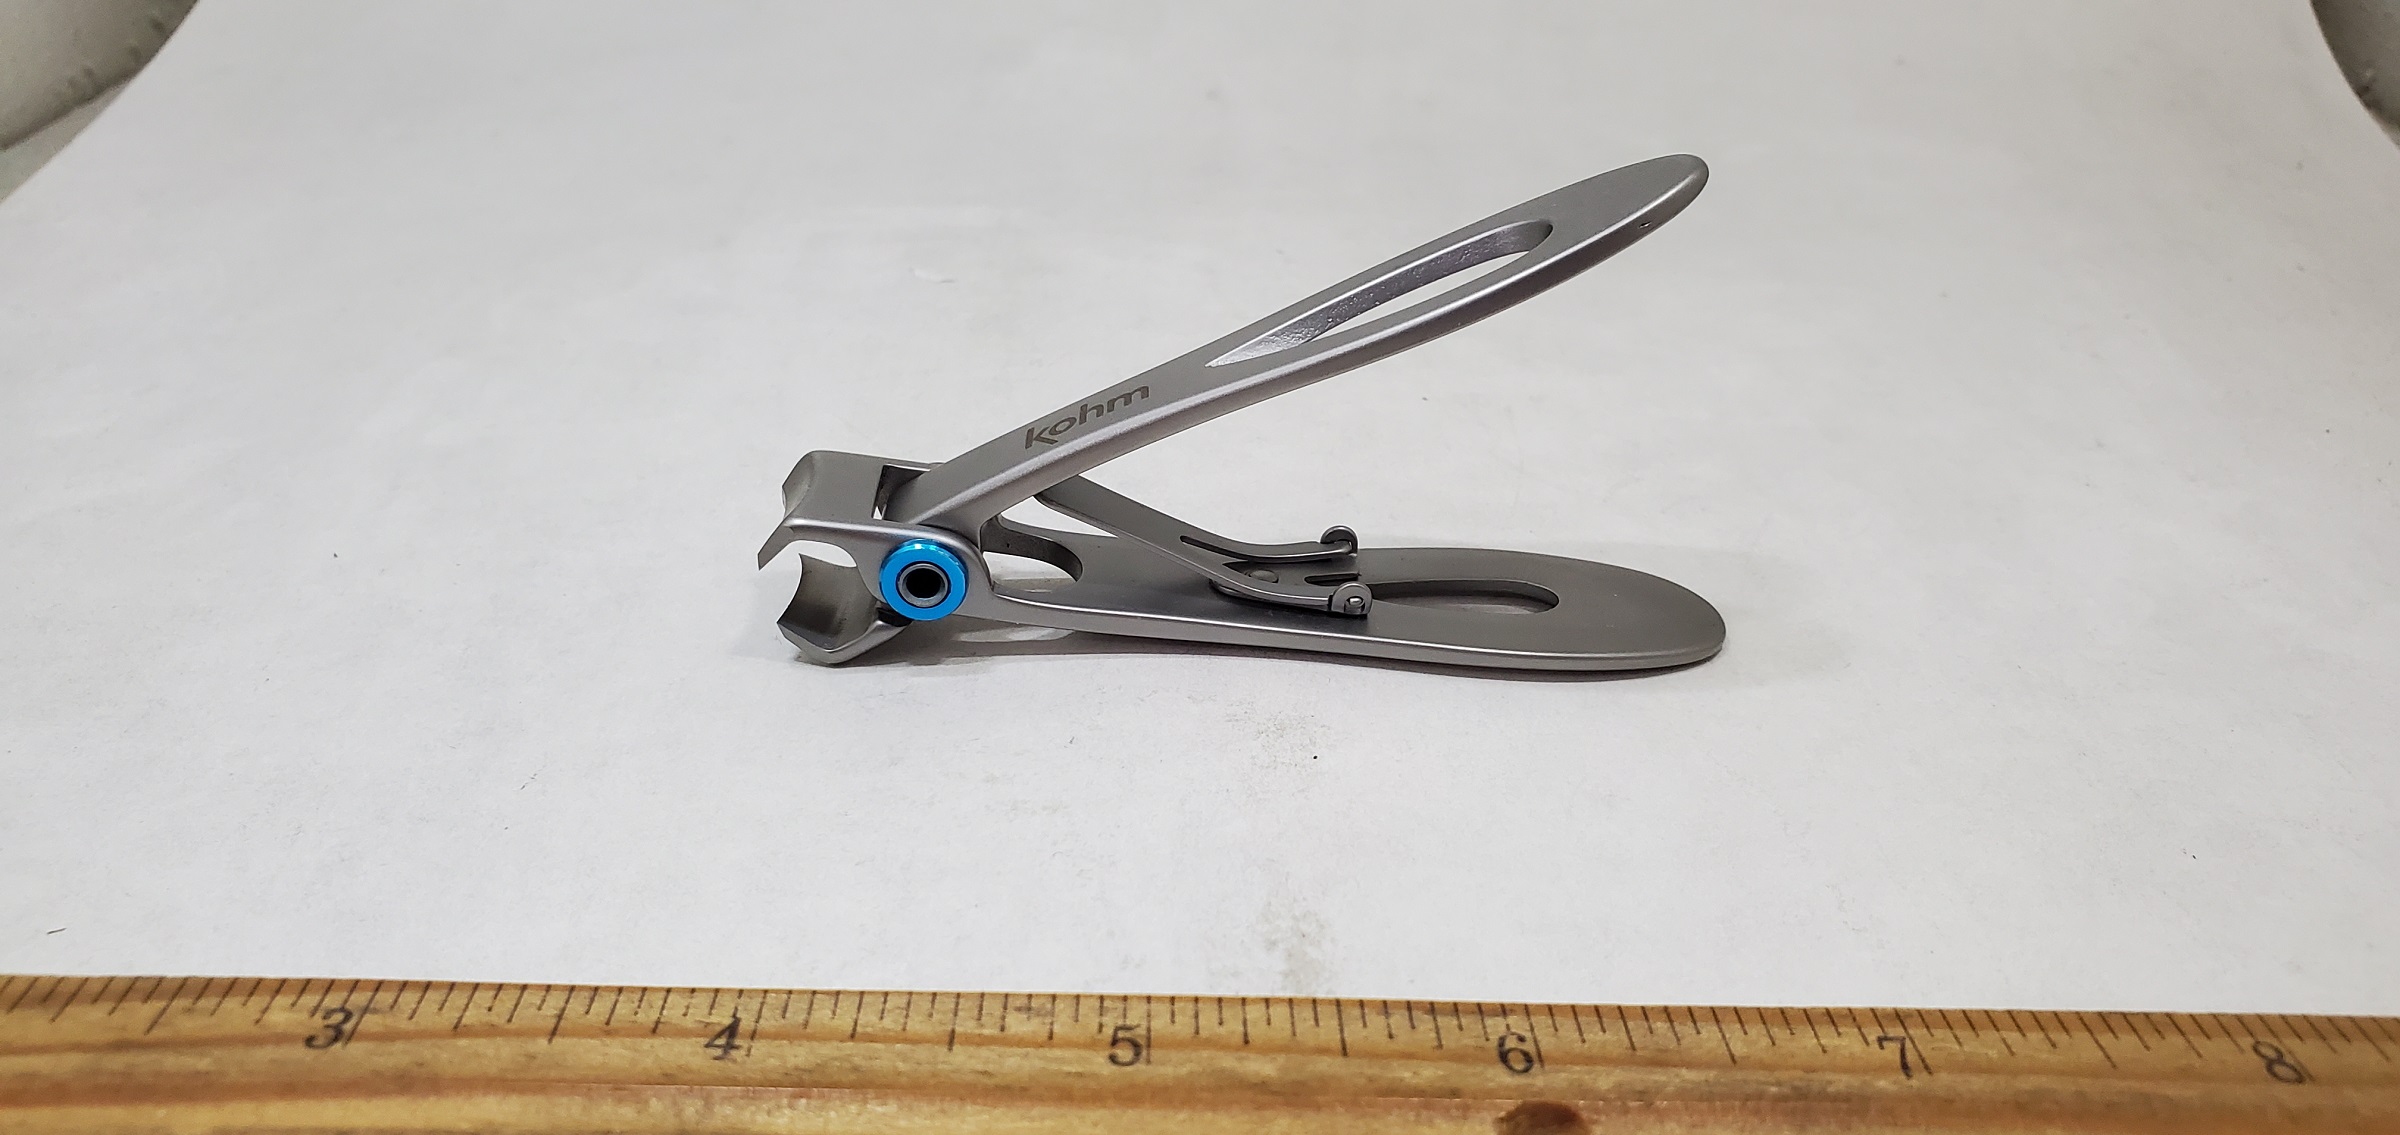 Mont Bleu Nail Clippers, made of Stainless Steel - Mont bleu Store